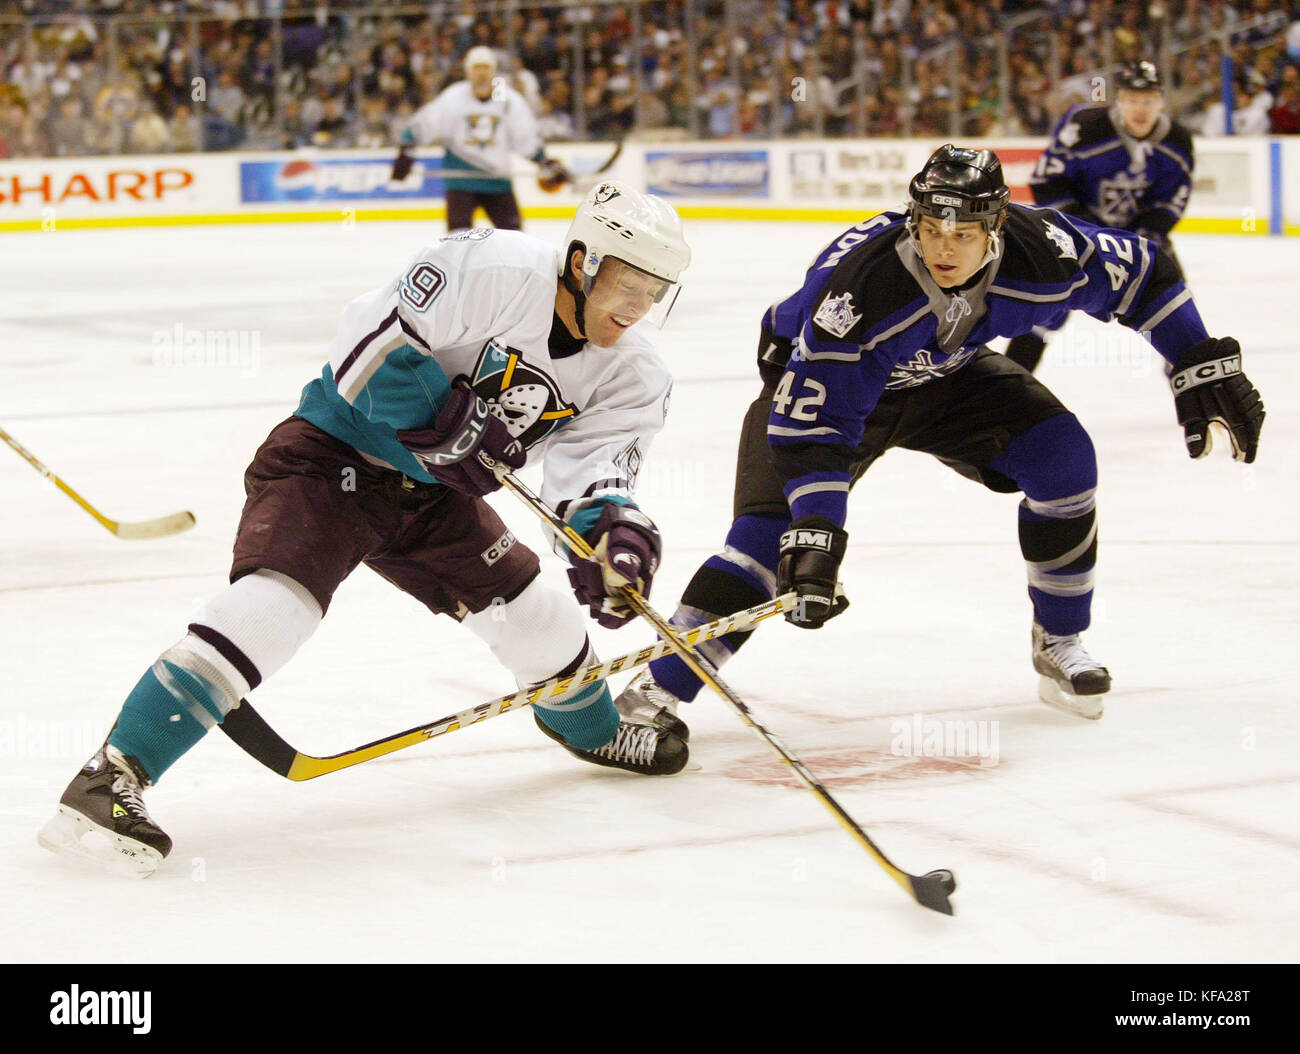 Anaheim Mighty Ducks Andy McDonald, (L) and Los Angeles Kings Tim Gleason battle for the puck in the third  period at the Staples Center in Los Angeles, Calif. on Saturday 28  February 2004. The Kings won, 2-1. Photo by Francis Specker Stock Photo